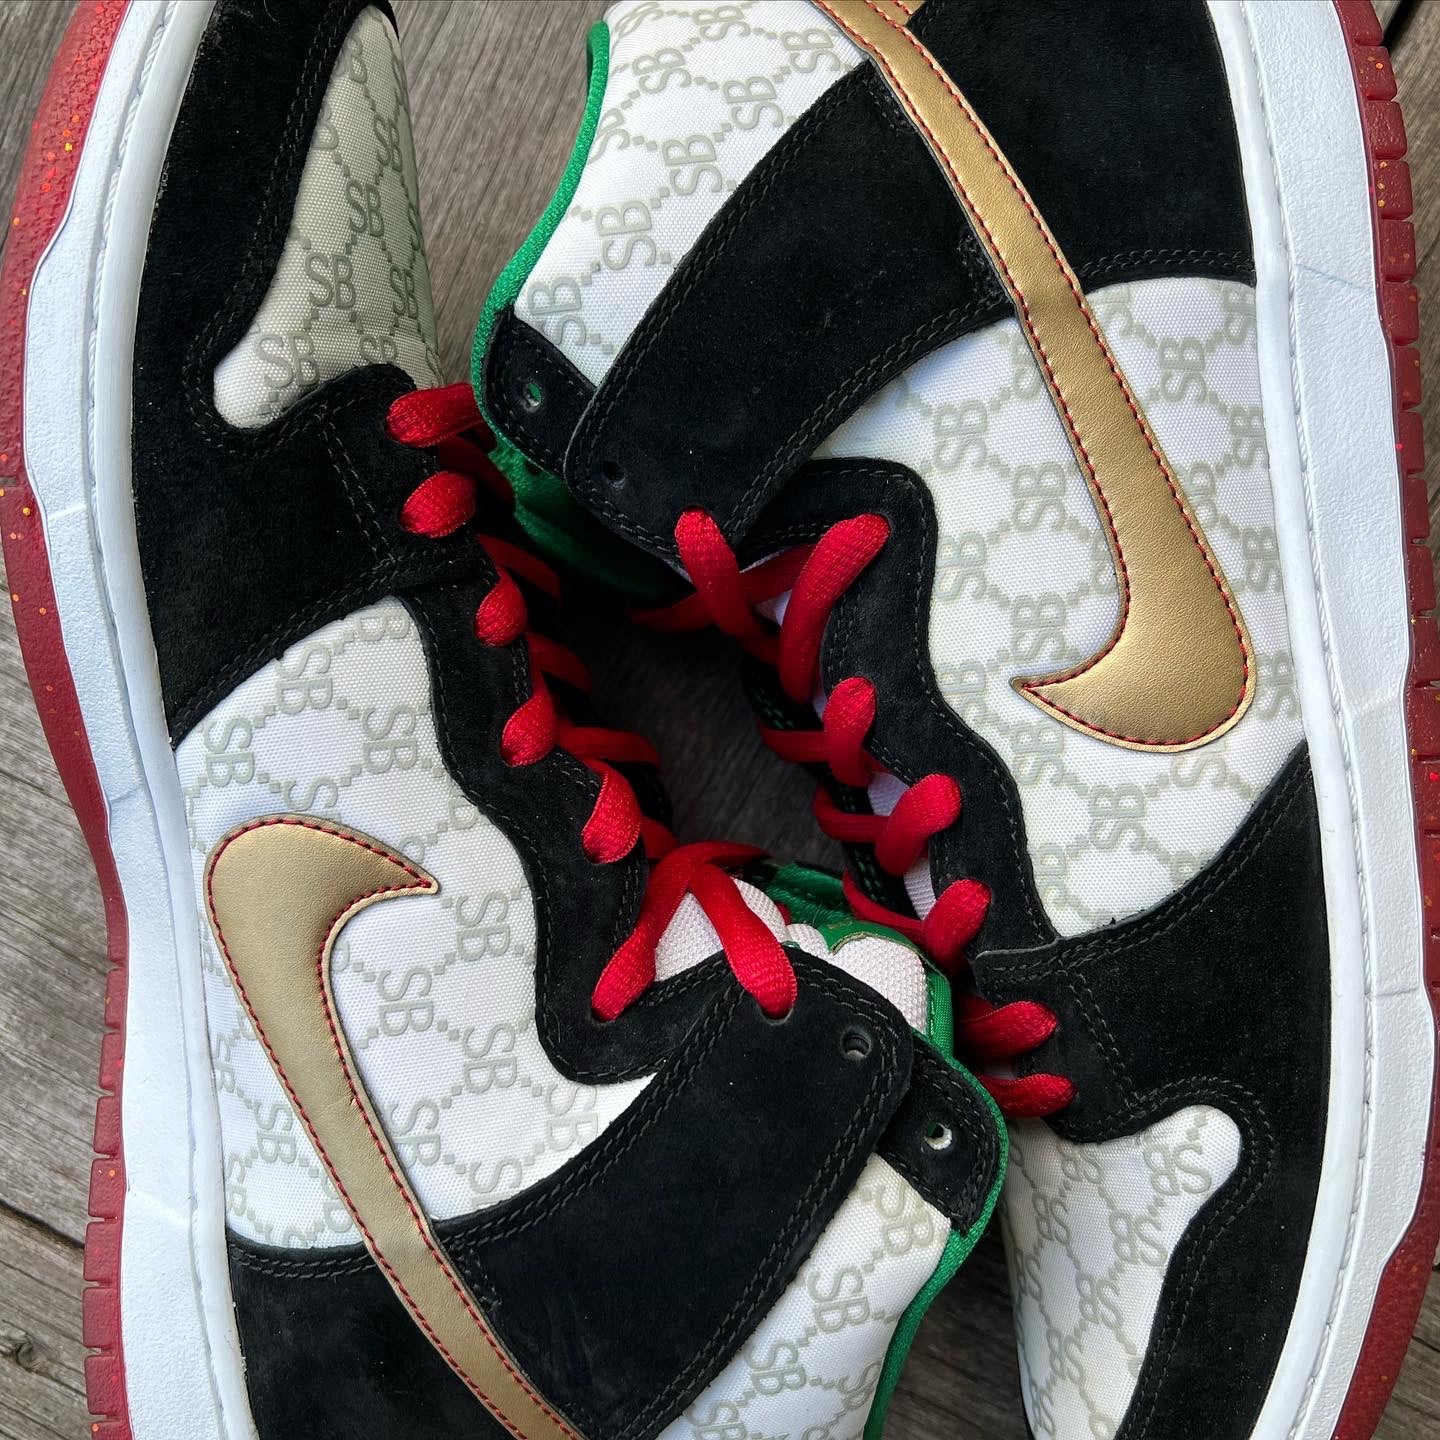 Nike SB Dunk Paid in Full Special Box Size 12